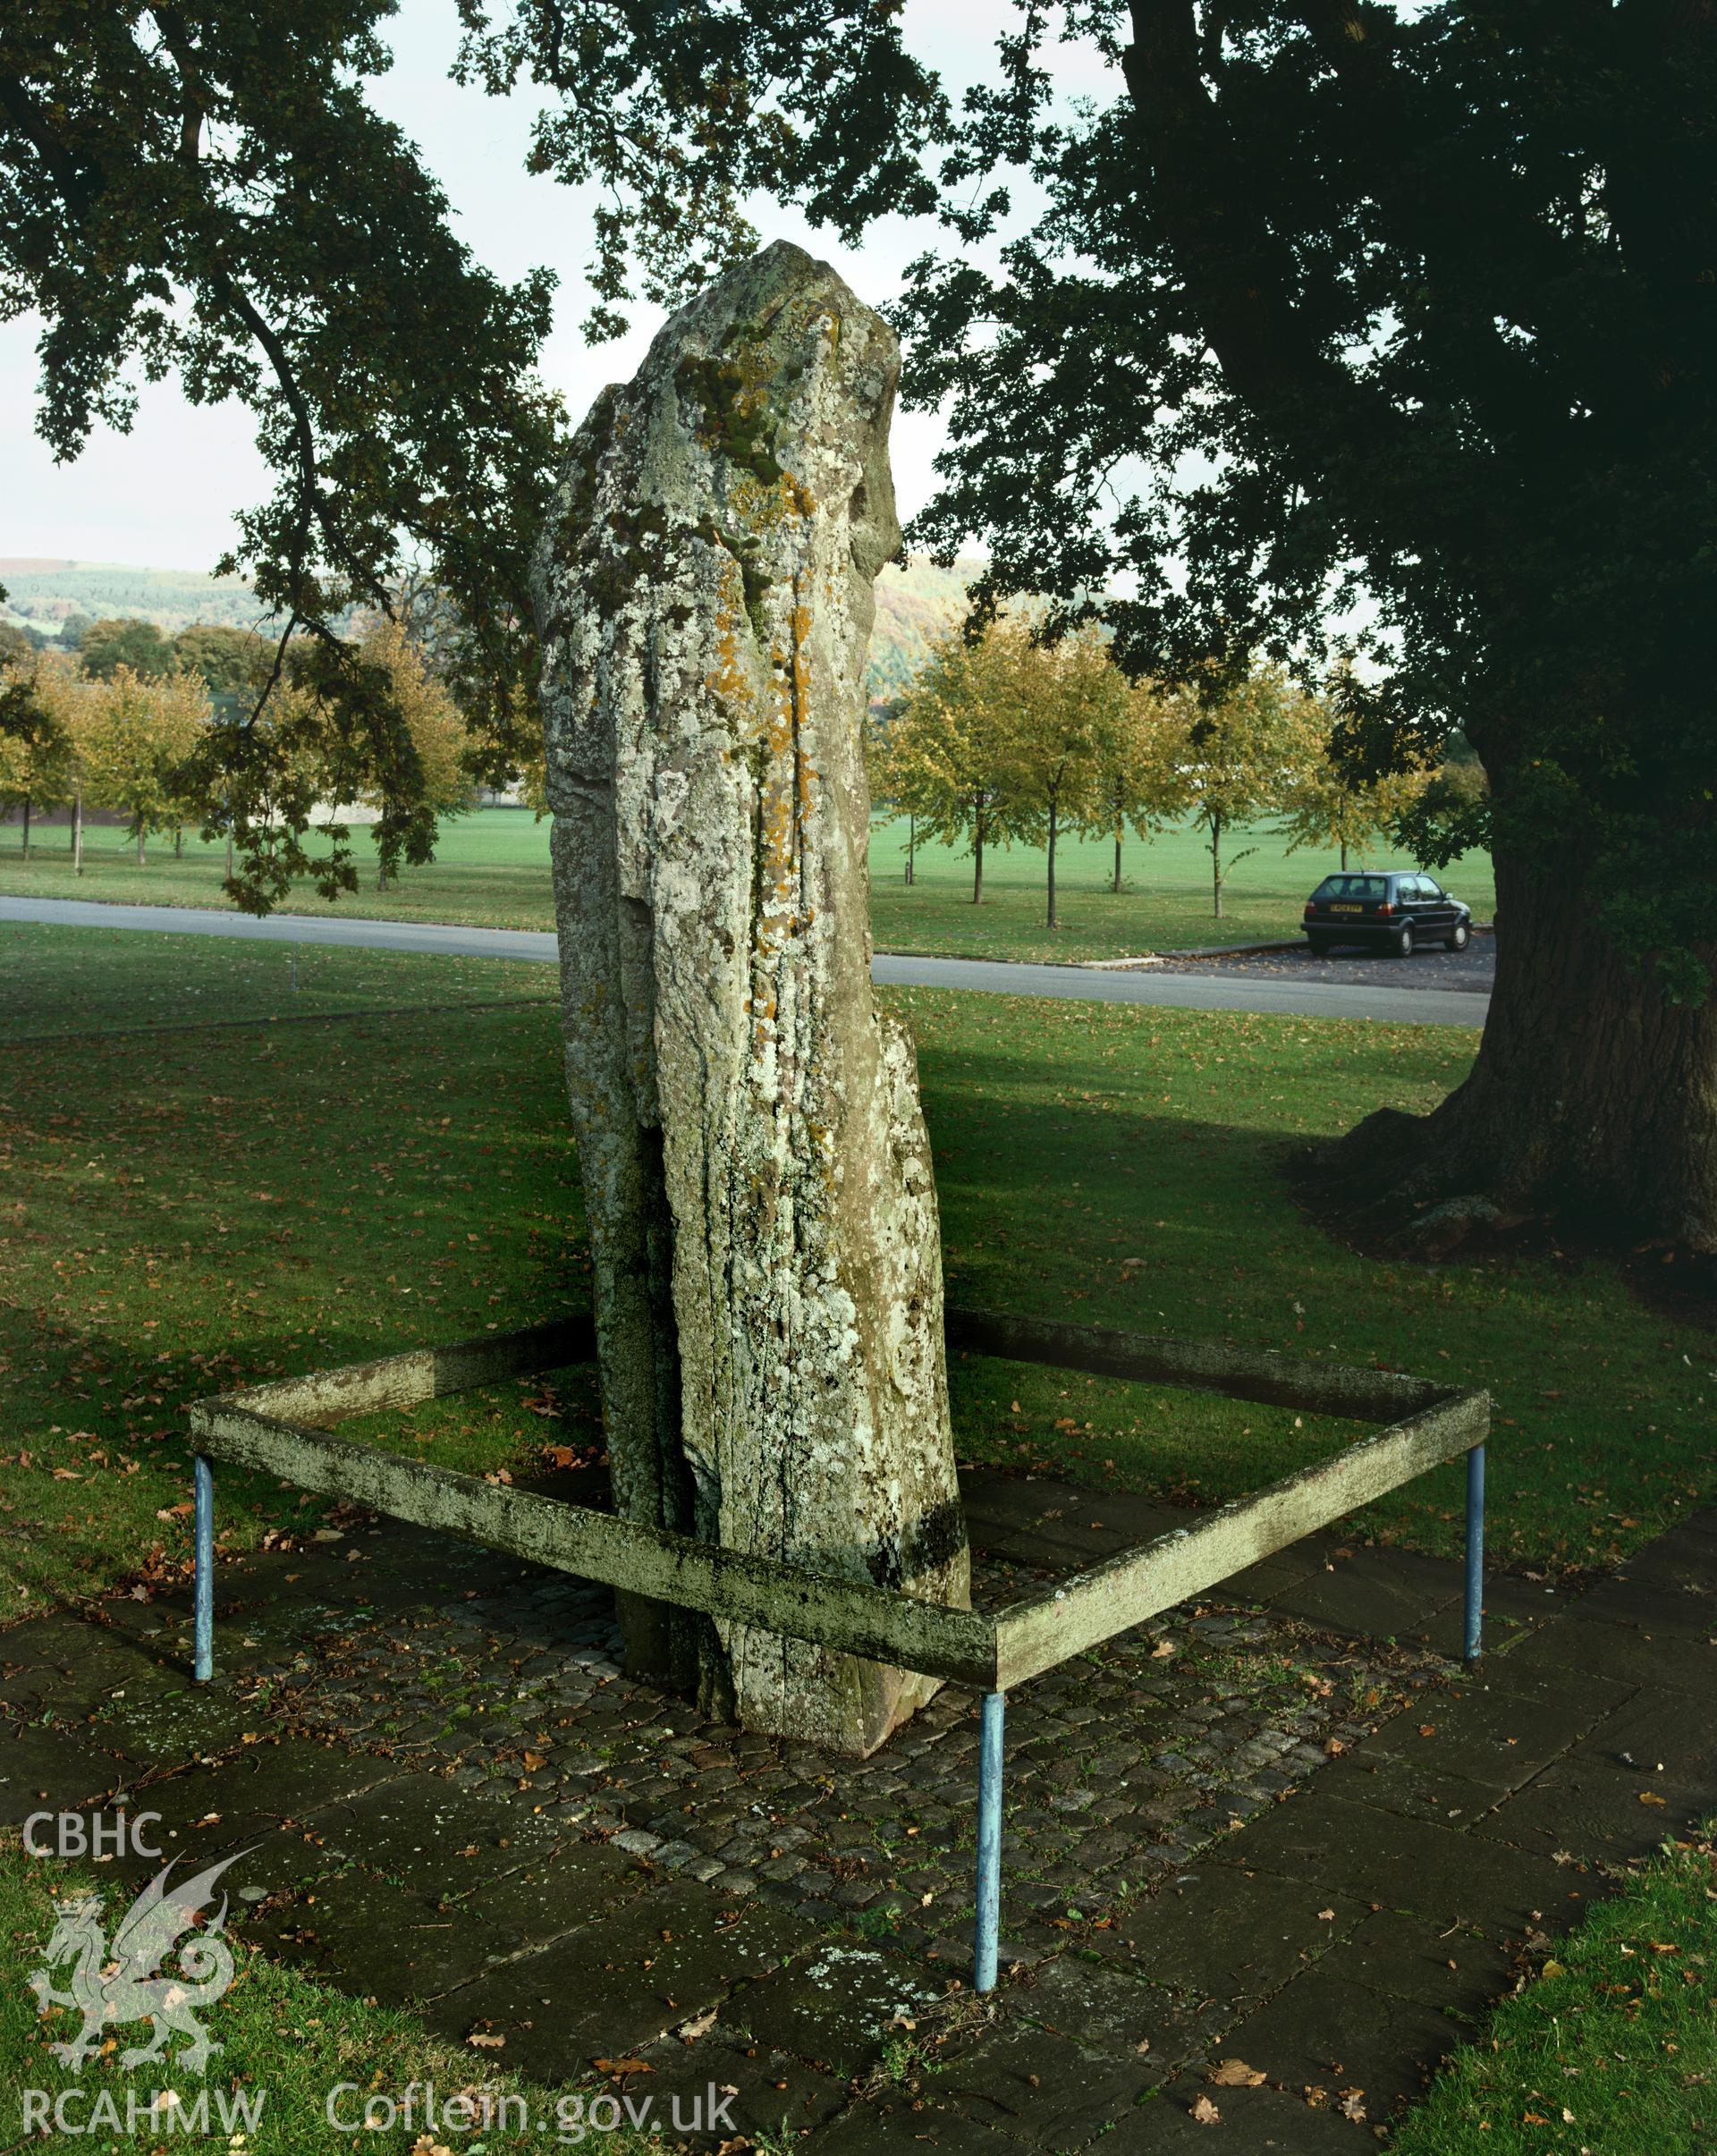 Colour transparency showing a view of Cwrt y Gollen standing stone, produced by Iain Wright, c.1981